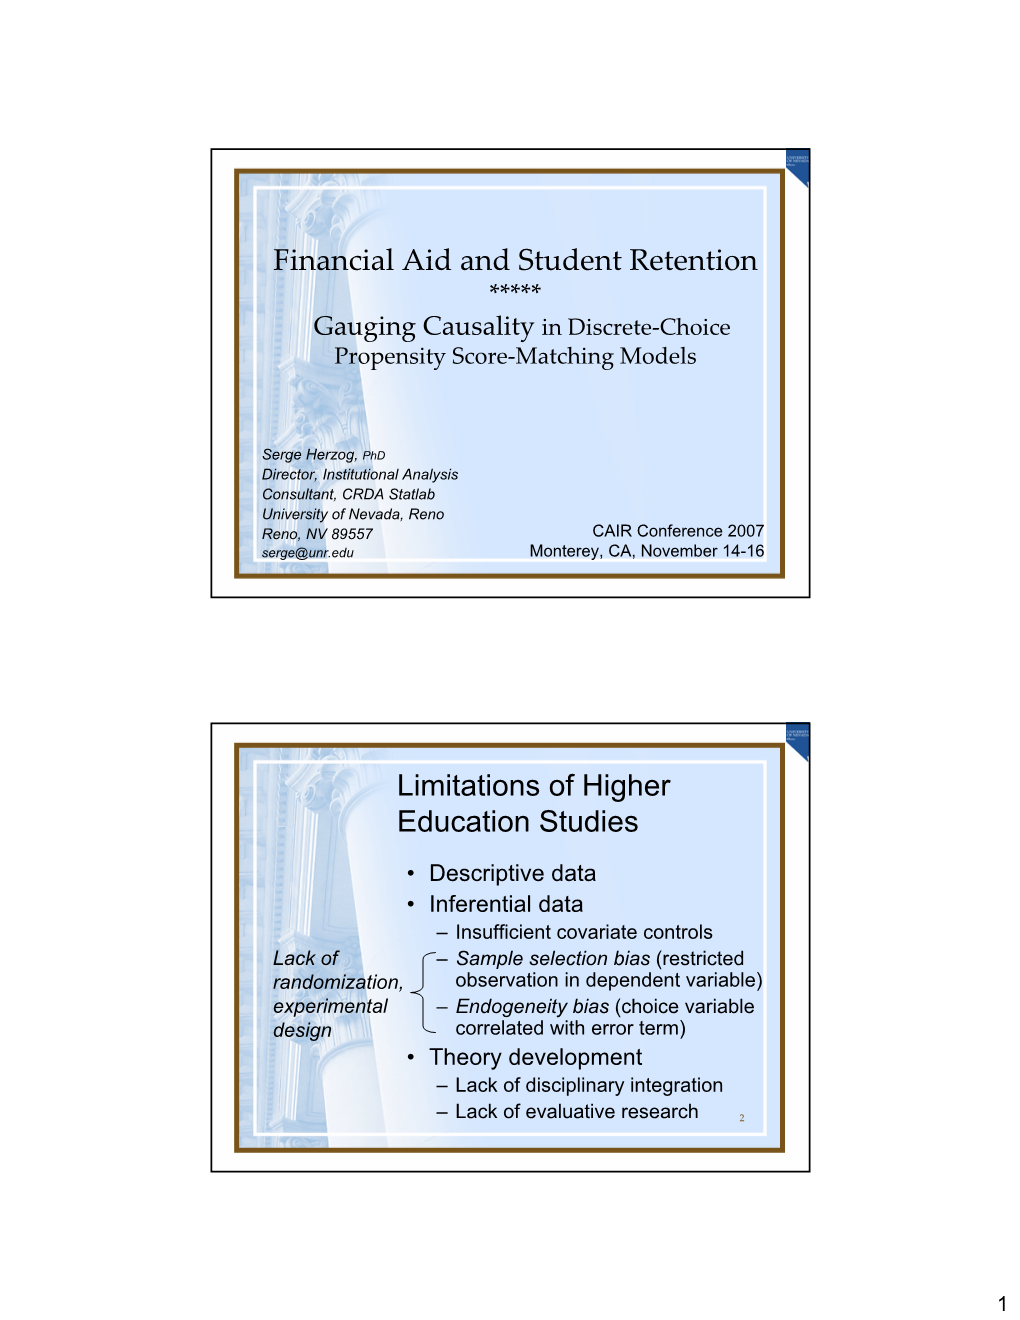 Financial Aid and Student Retention Limitations of Higher Education